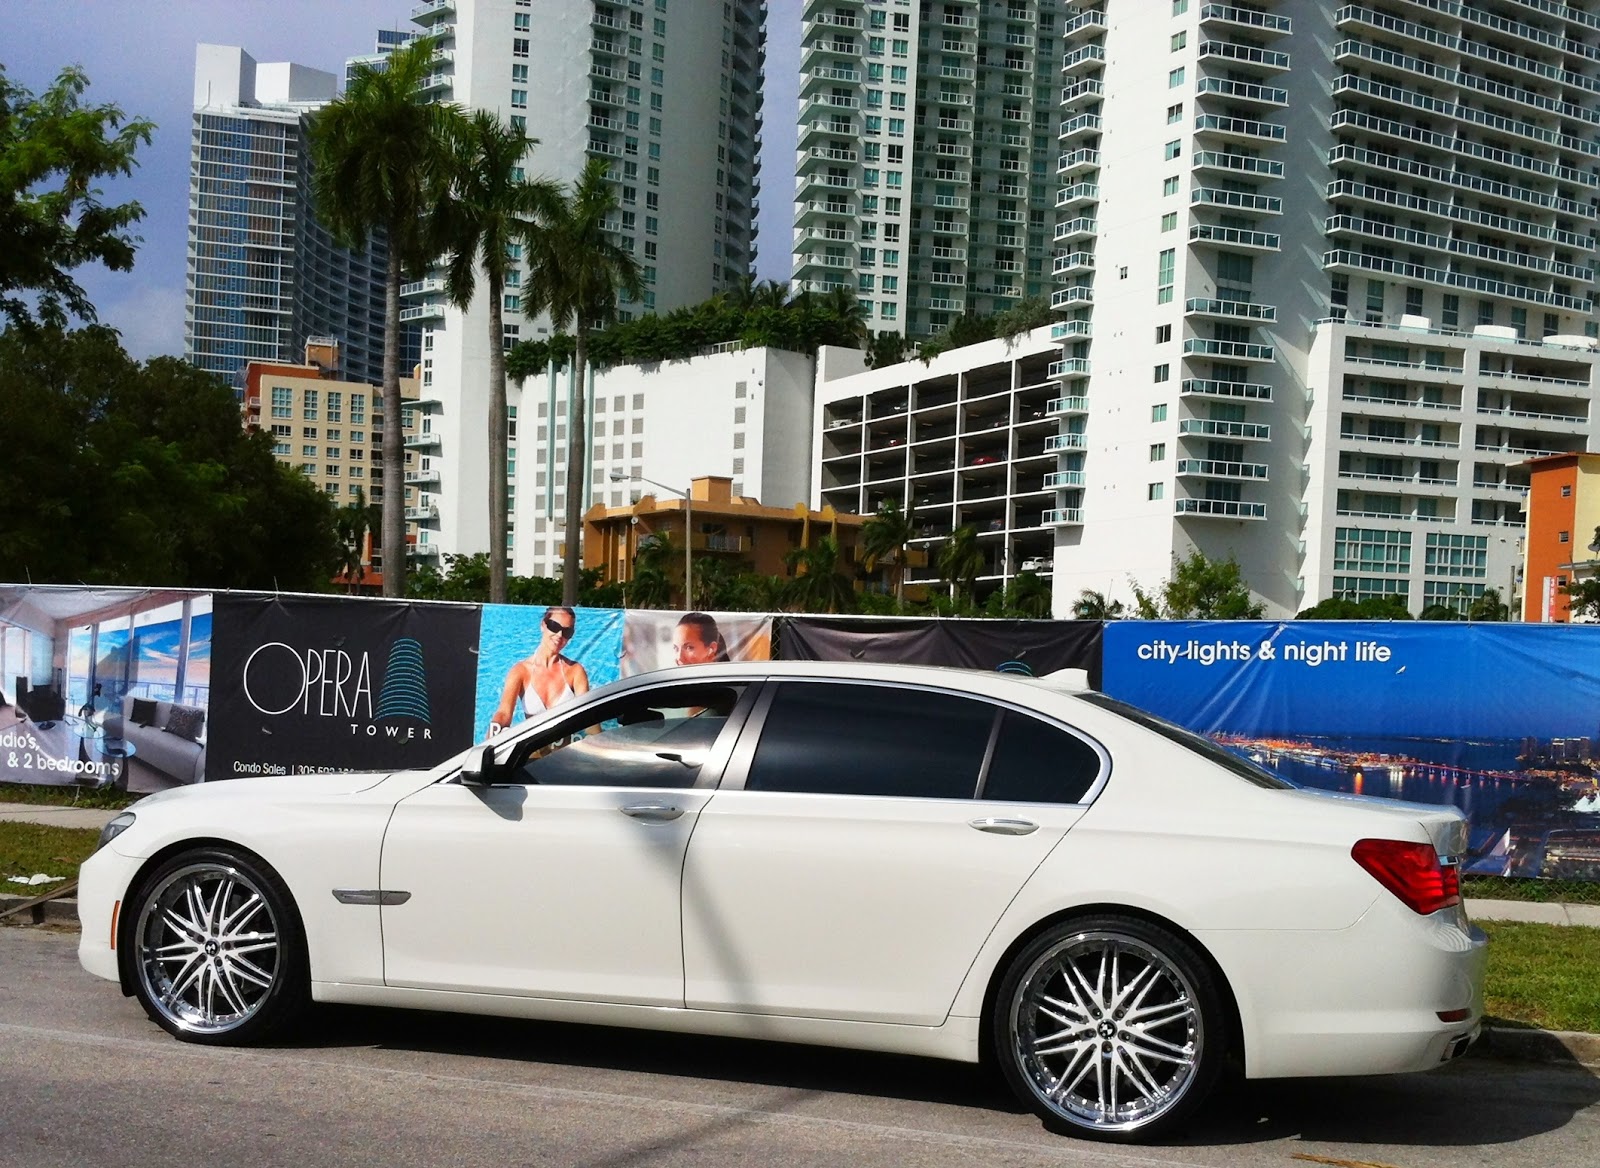 White BMW 7 Series with custom white rims | Exotic Cars on the Streets